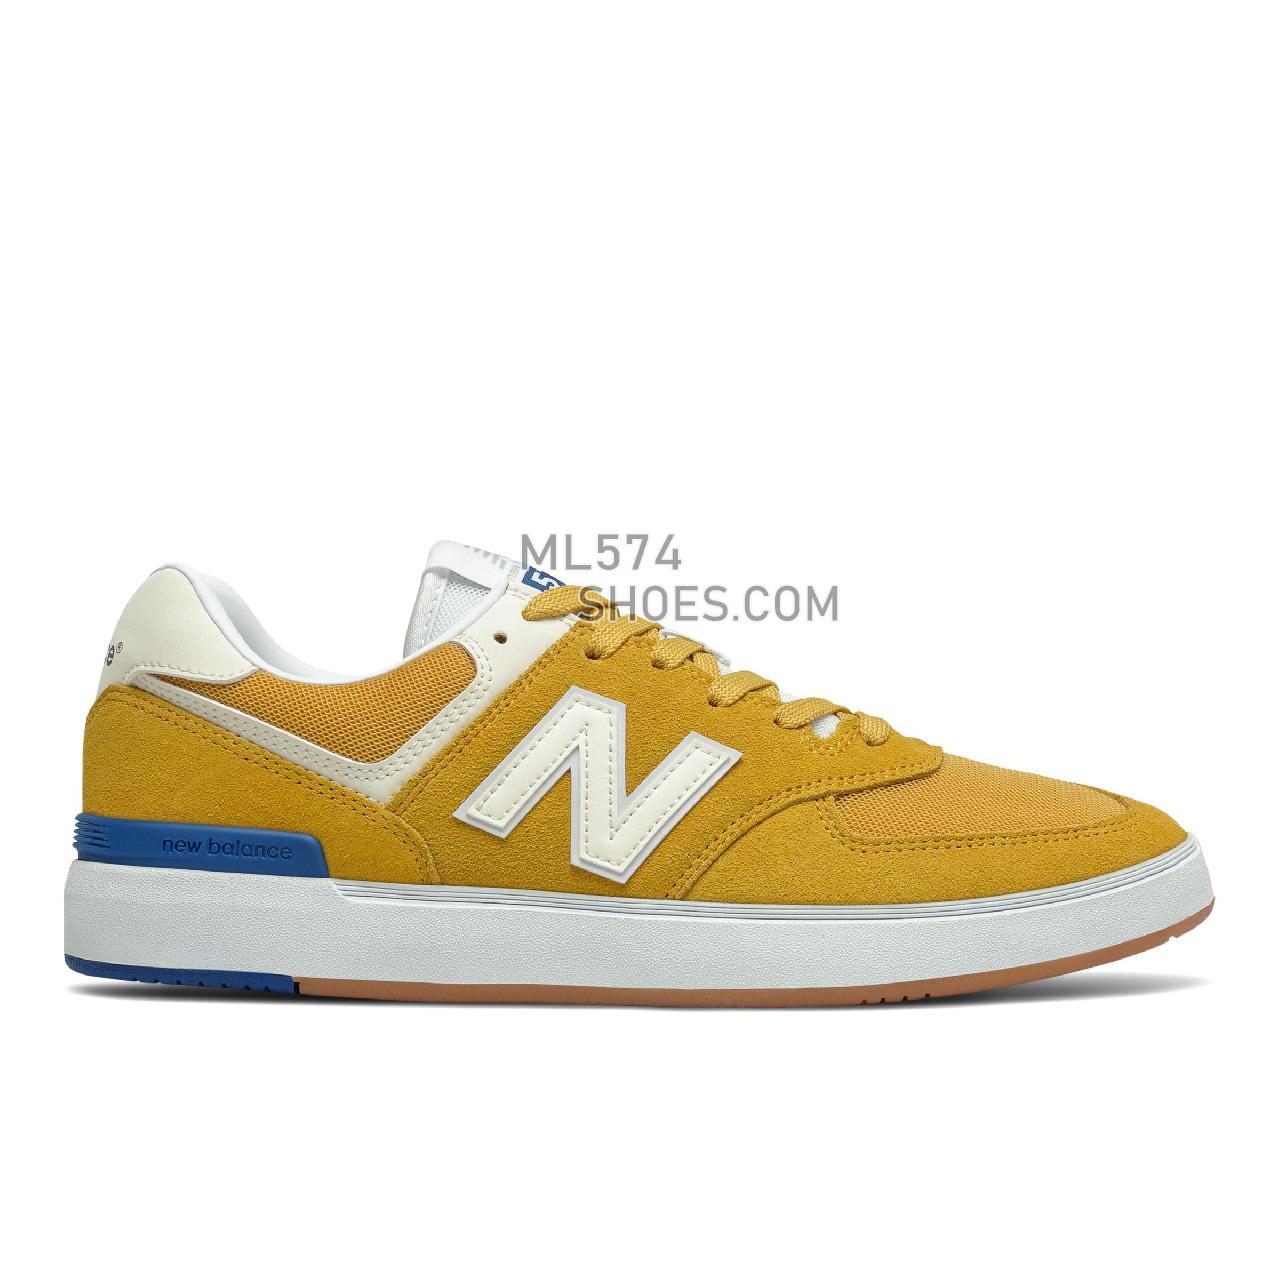 New Balance All Coasts AM574 - Men's Court Classics - Yellow with White - AM574YWB